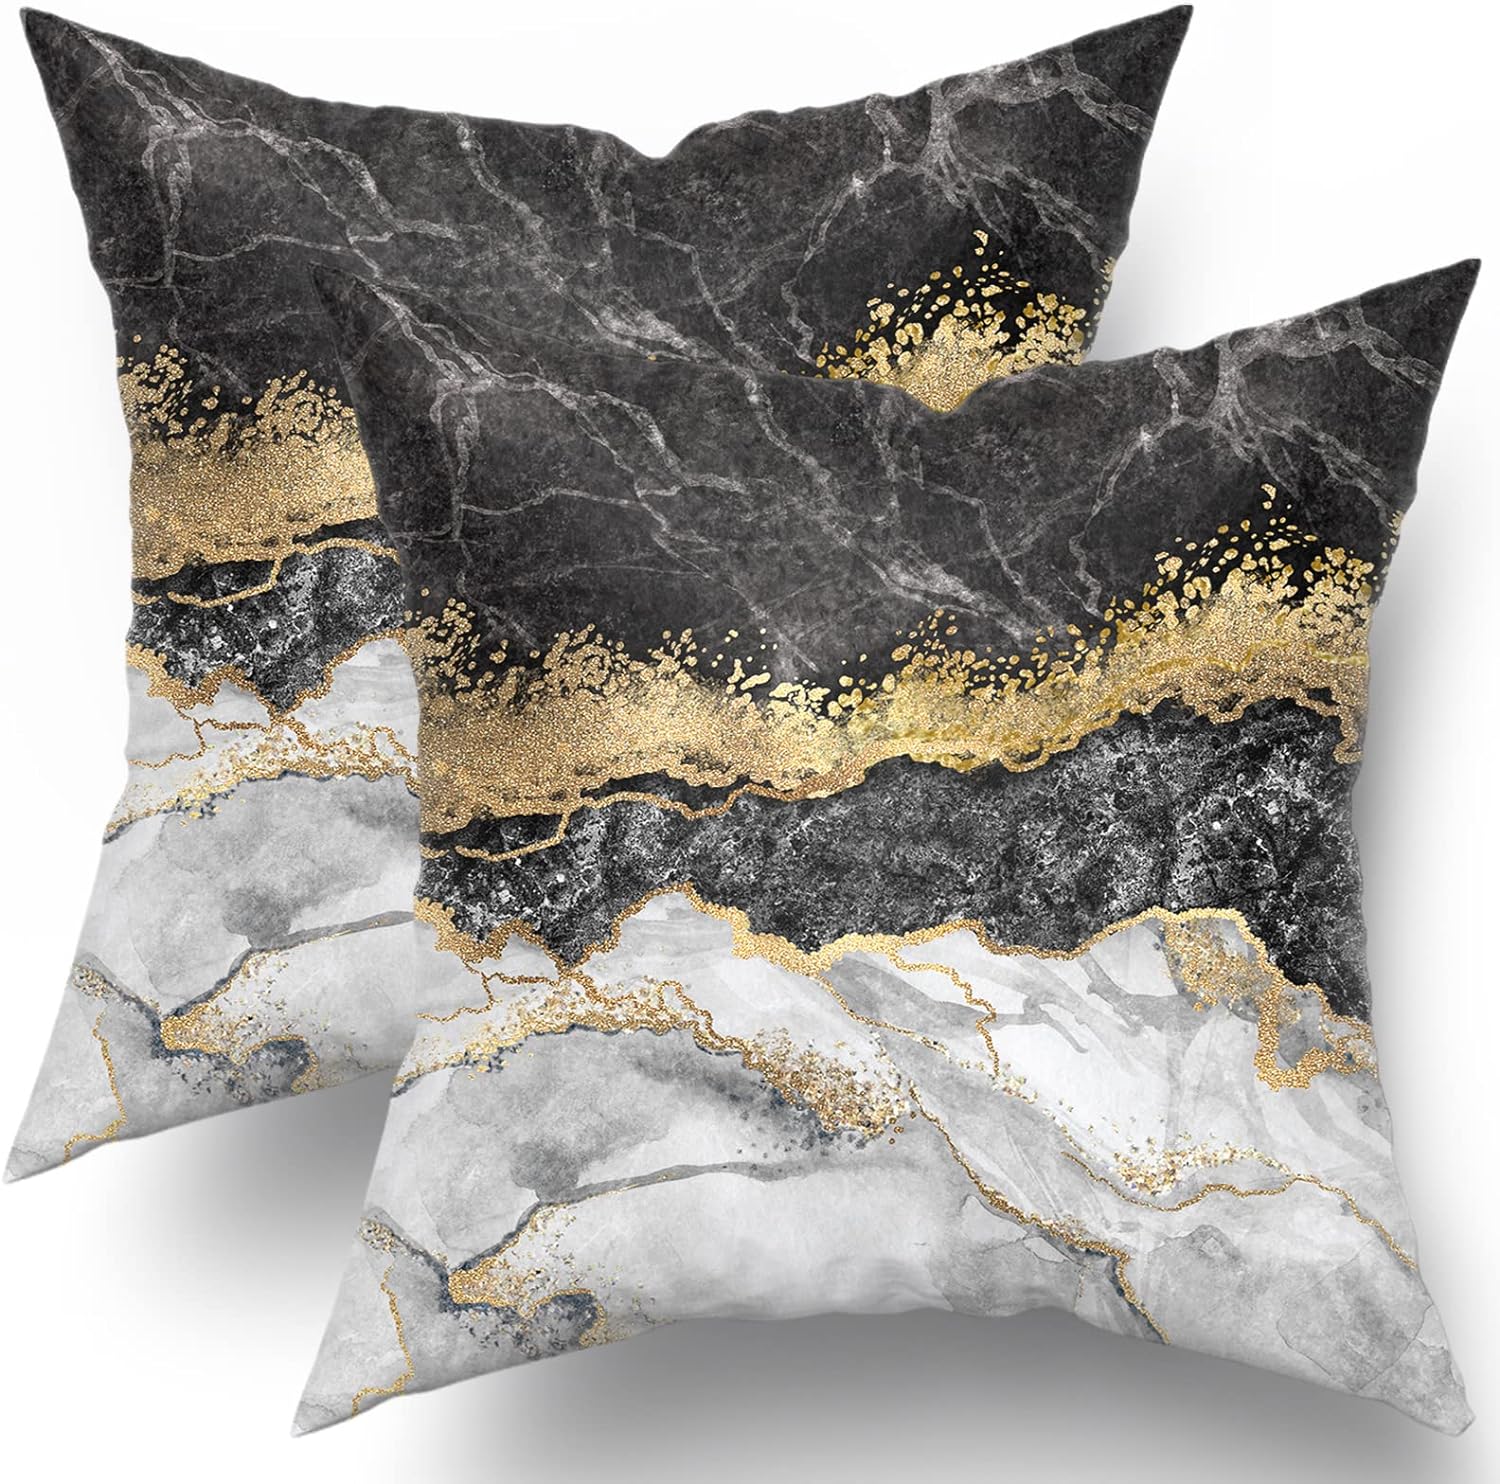 Marble Texture Pillow Cover 18 x 18 Inch Black Gray Gold Foil Throw Pillow Cover Decorative Pillows Cotton Material Cushion Pillow Case For Bedroom Sofa Indoor Outdoor Living Room Home Decor Set of 2